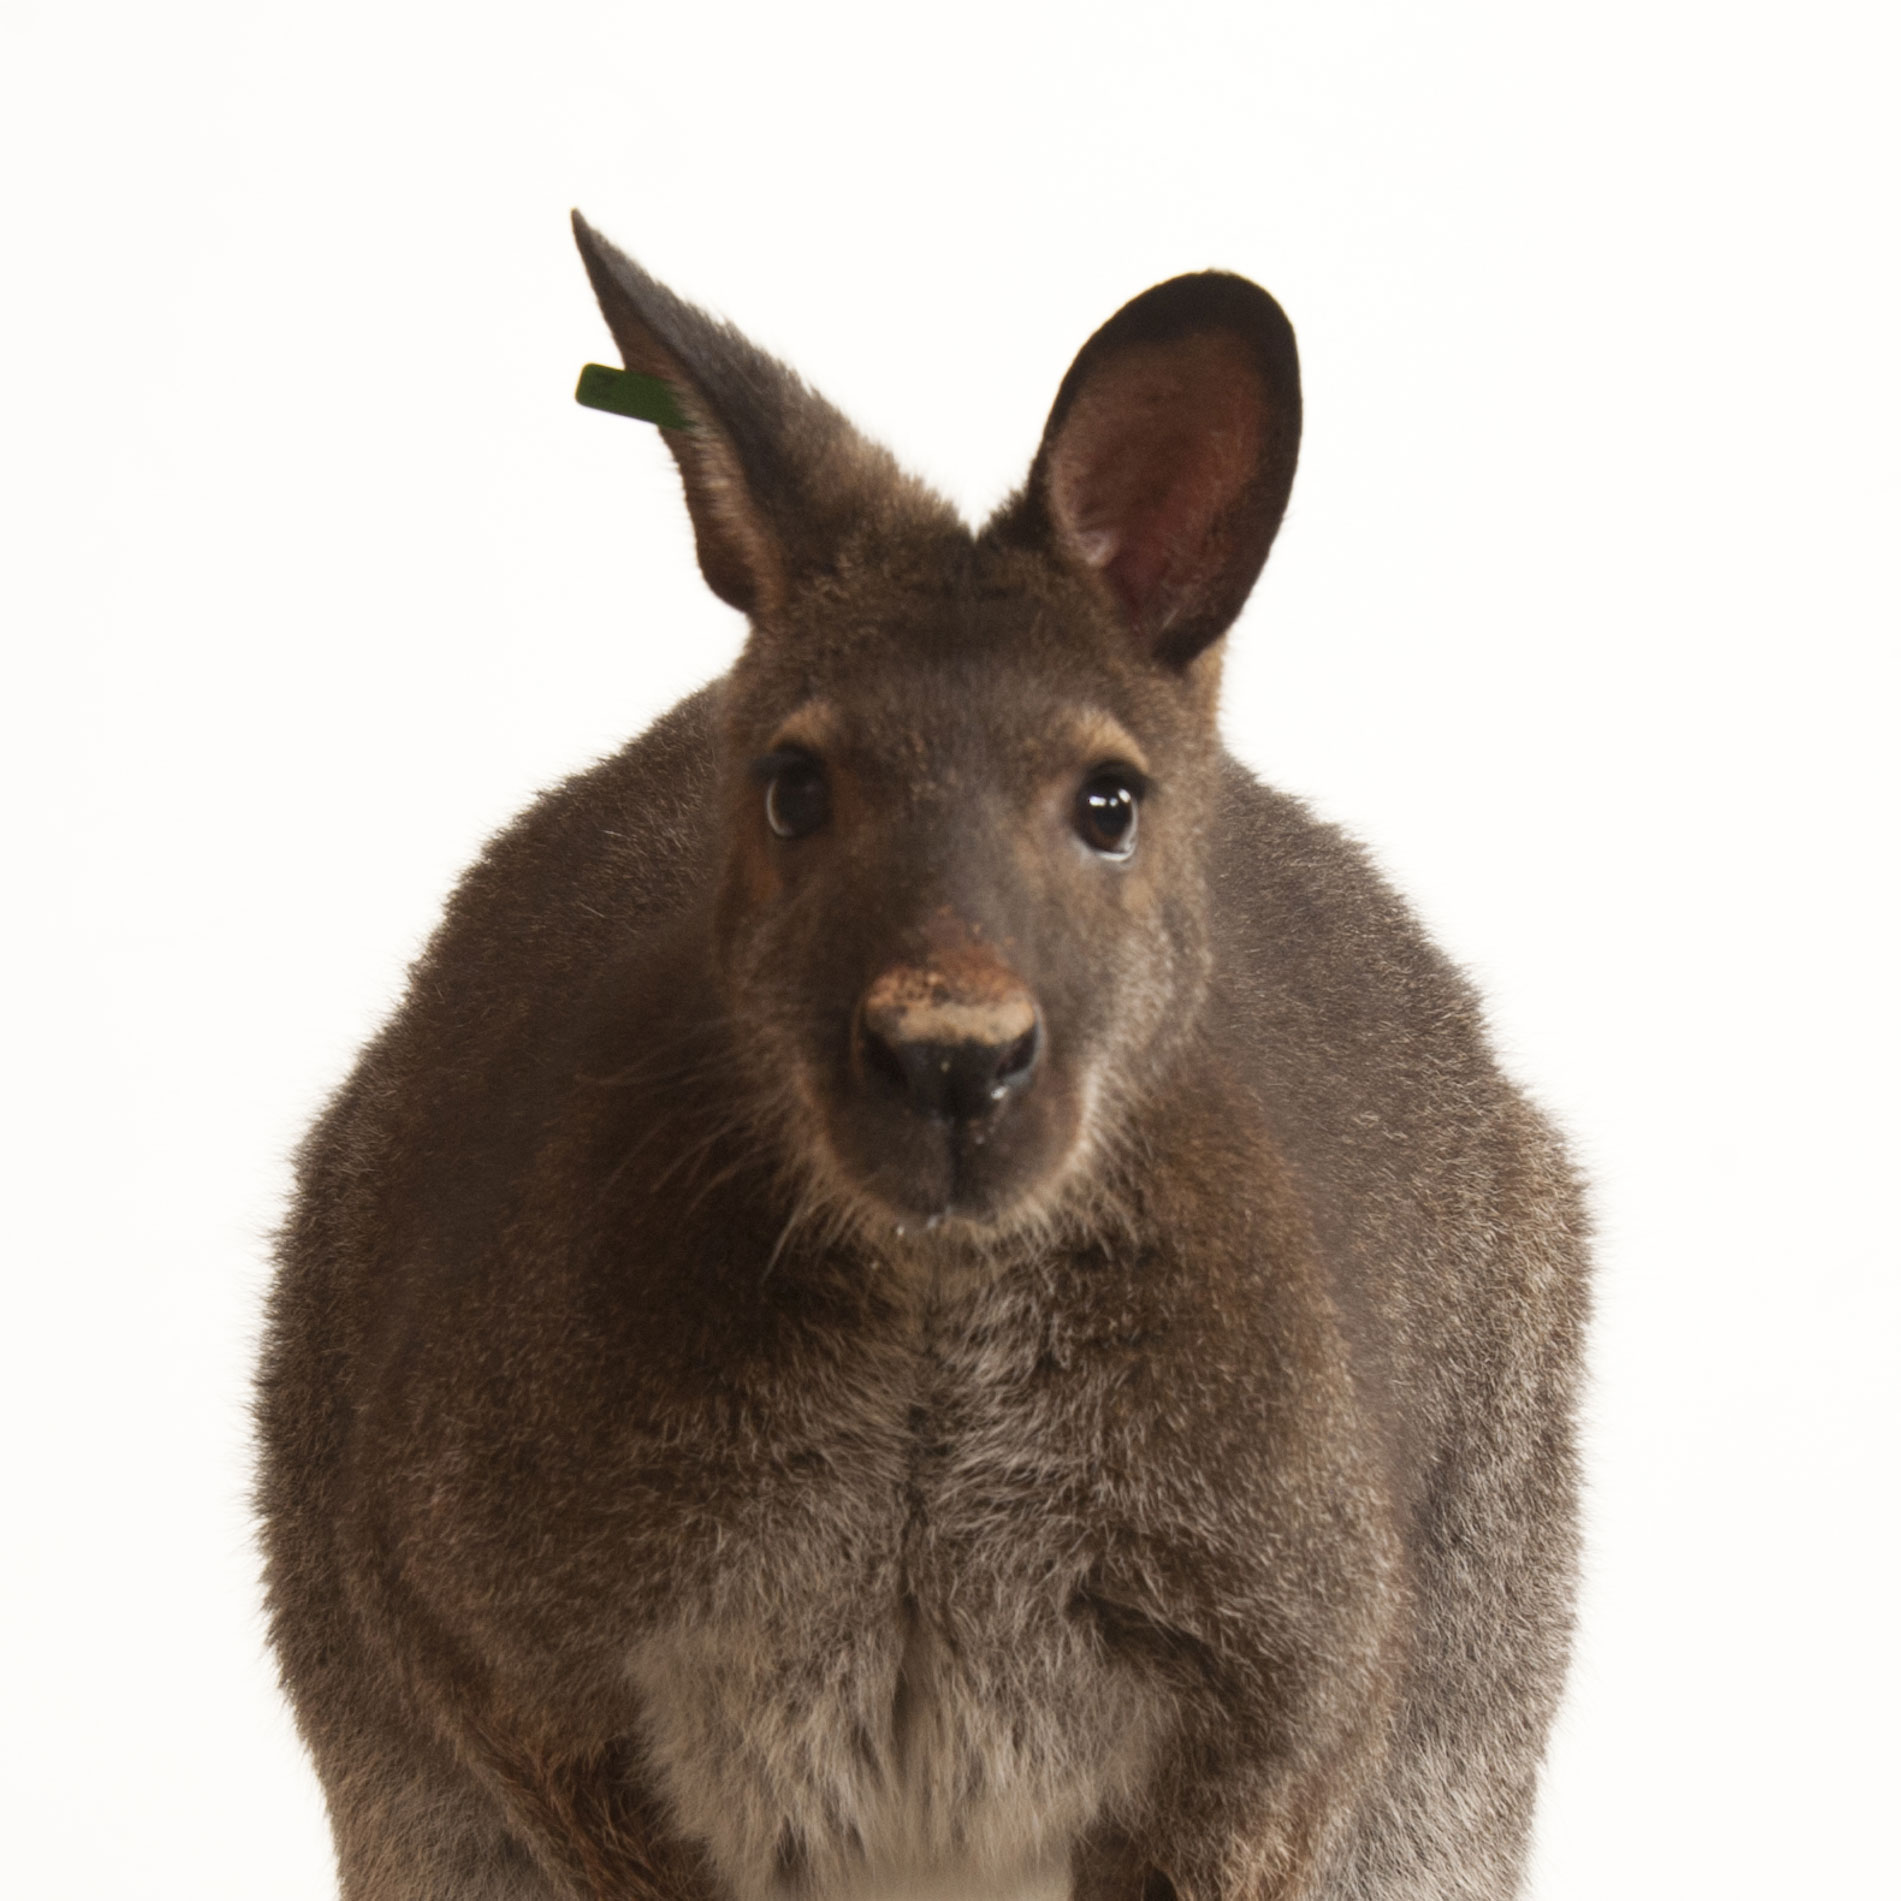 Wallabies | National Geographic